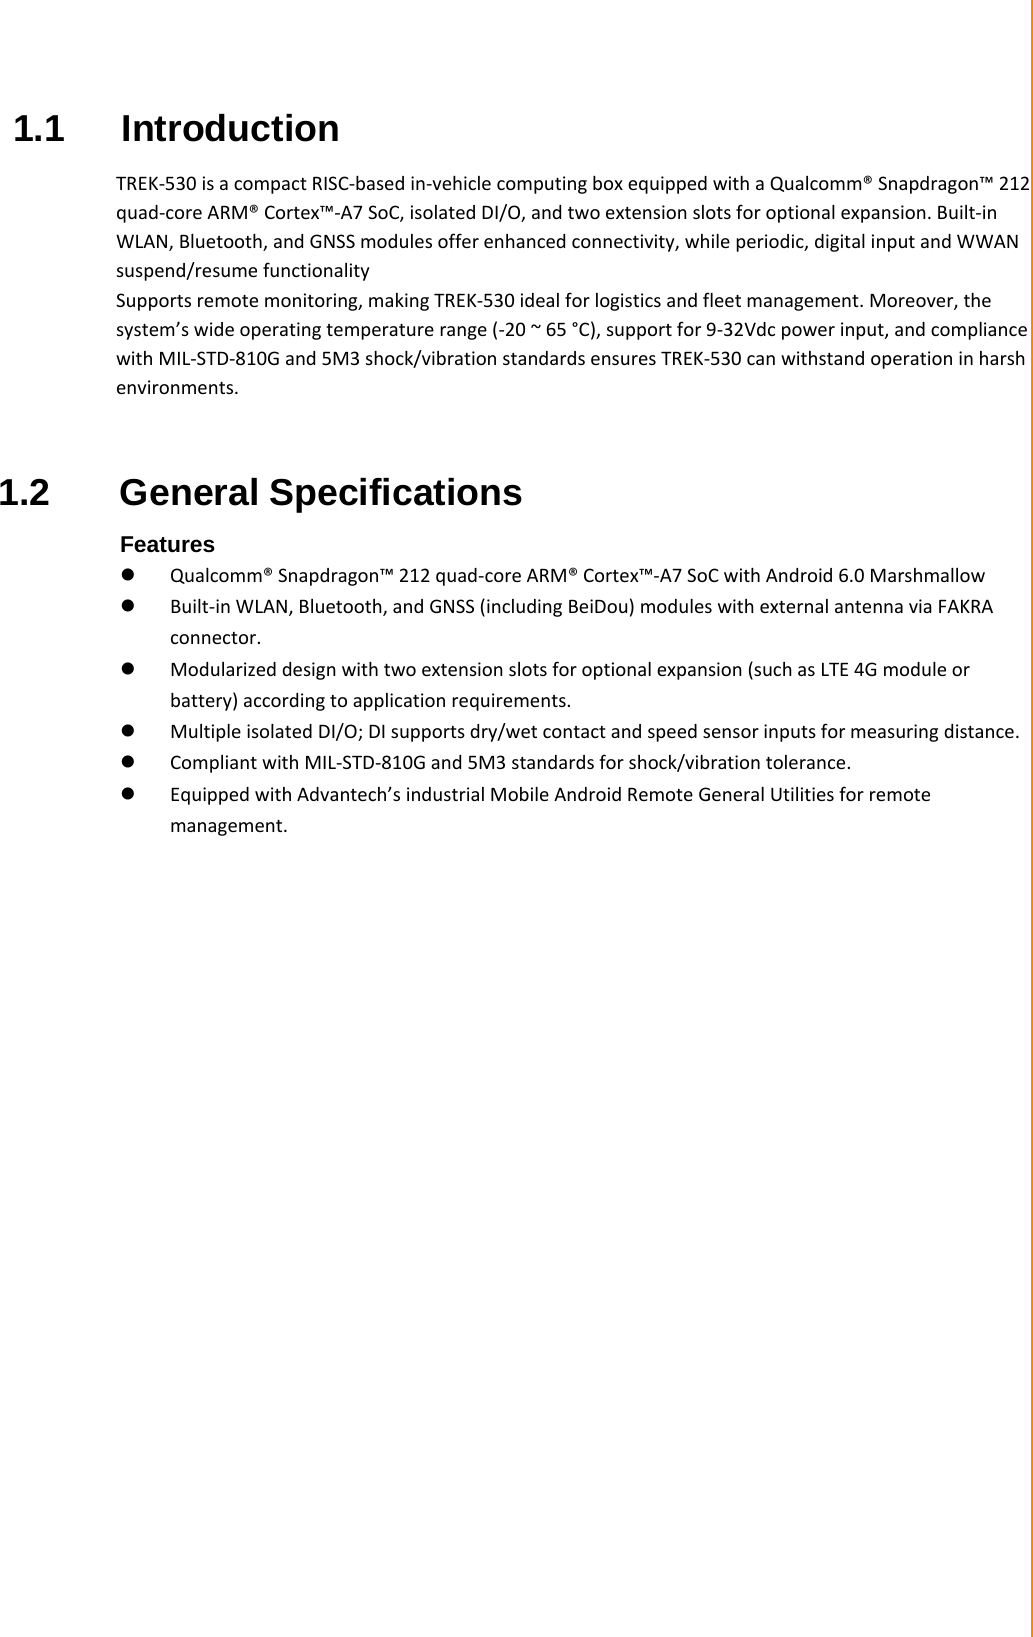   Chapter 1 General Information   1.1 Introduction  TREK-530 is a compact RISC-based in-vehicle computing box equipped with a Qualcomm® Snapdragon™ 212 quad-core ARM® Cortex™-A7 SoC, isolated DI/O, and two extension slots for optional expansion. Built-in WLAN, Bluetooth, and GNSS modules offer enhanced connectivity, while periodic, digital input and WWAN suspend/resume functionality Supports remote monitoring, making TREK-530 ideal for logistics and fleet management. Moreover, the system’s wide operating temperature range (-20 ~ 65 °C), support for 9-32Vdc power input, and compliance with MIL-STD-810G and 5M3 shock/vibration standards ensures TREK-530 can withstand operation in harsh environments.   1.2  General Specifications  Features  Qualcomm® Snapdragon™ 212 quad-core ARM® Cortex™-A7 SoC with Android 6.0 Marshmallow  Built-in WLAN, Bluetooth, and GNSS (including BeiDou) modules with external antenna via FAKRA connector.  Modularized design with two extension slots for optional expansion (such as LTE 4G module or battery) according to application requirements.  Multiple isolated DI/O; DI supports dry/wet contact and speed sensor inputs for measuring distance.  Compliant with MIL-STD-810G and 5M3 standards for shock/vibration tolerance.  Equipped with Advantech’s industrial Mobile Android Remote General Utilities for remote management. 